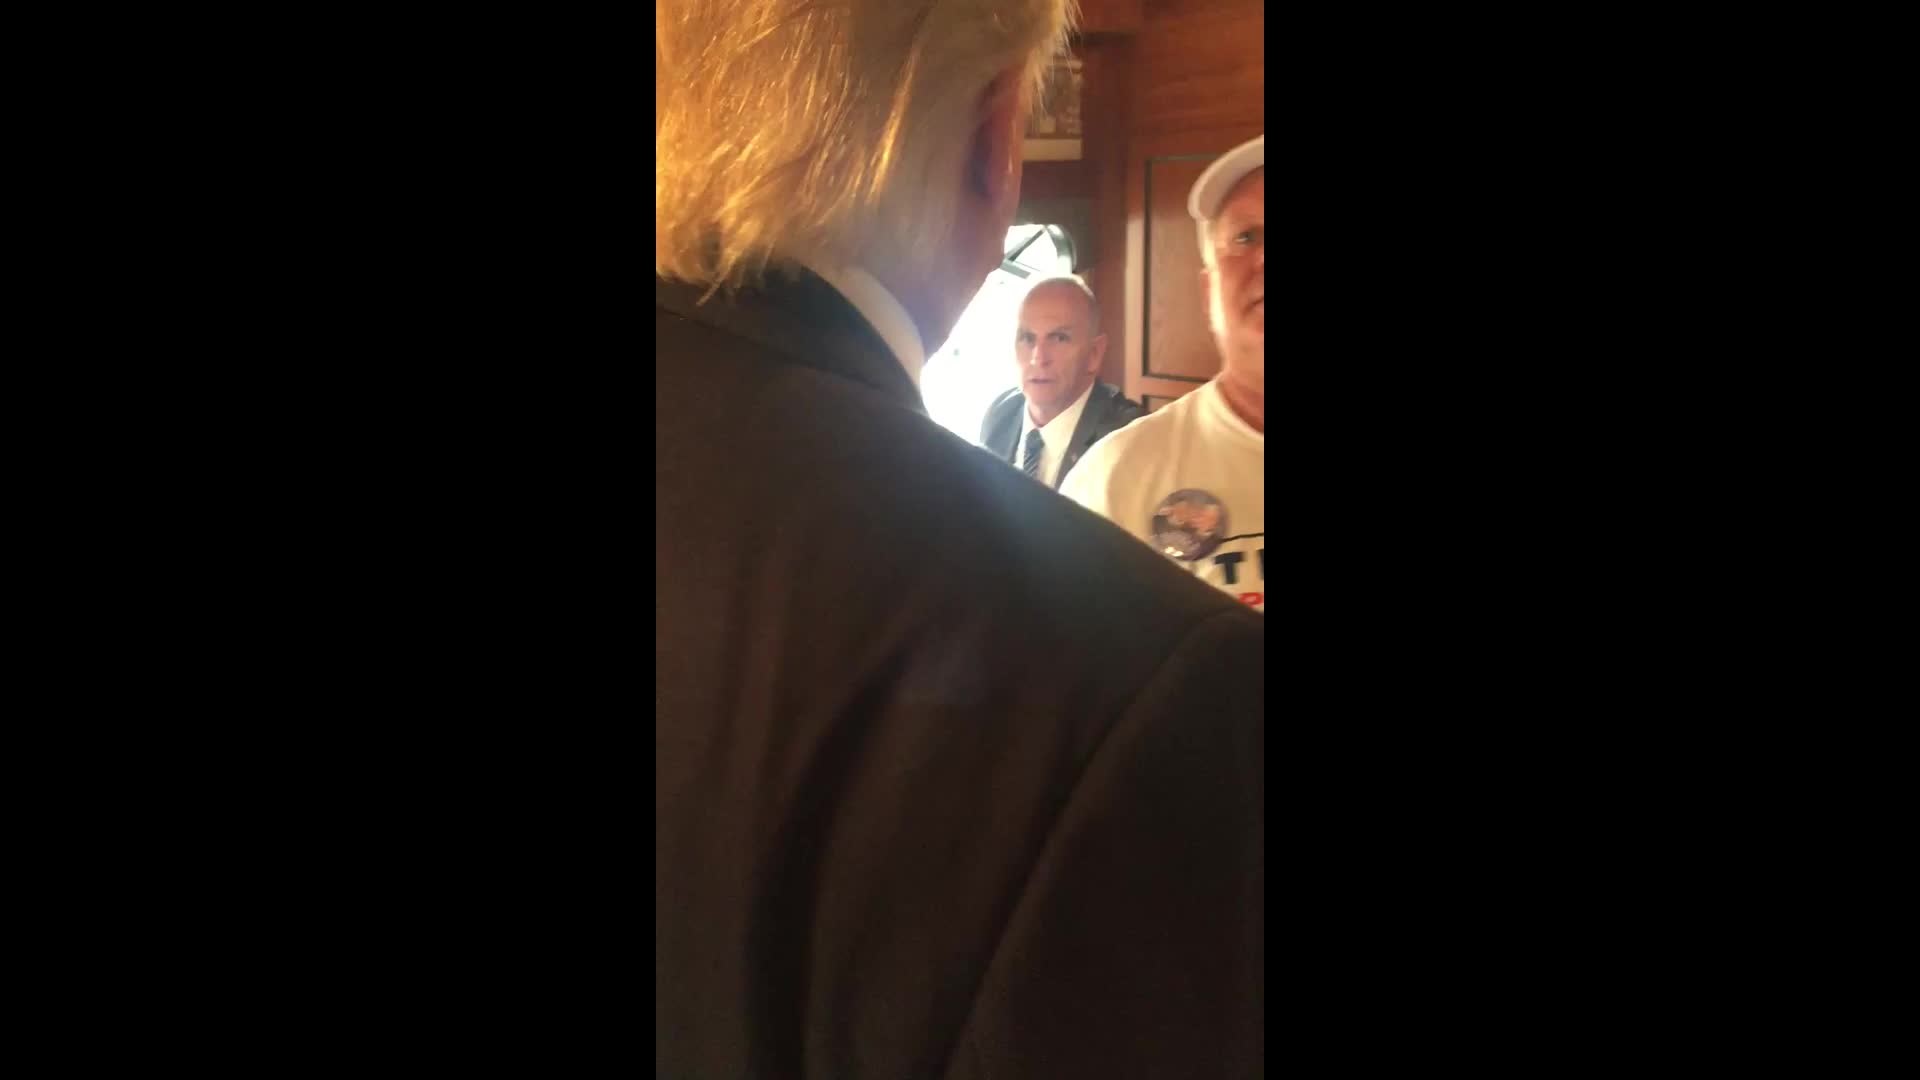 Video of the moment in question, taken by Trump campaign volunteer